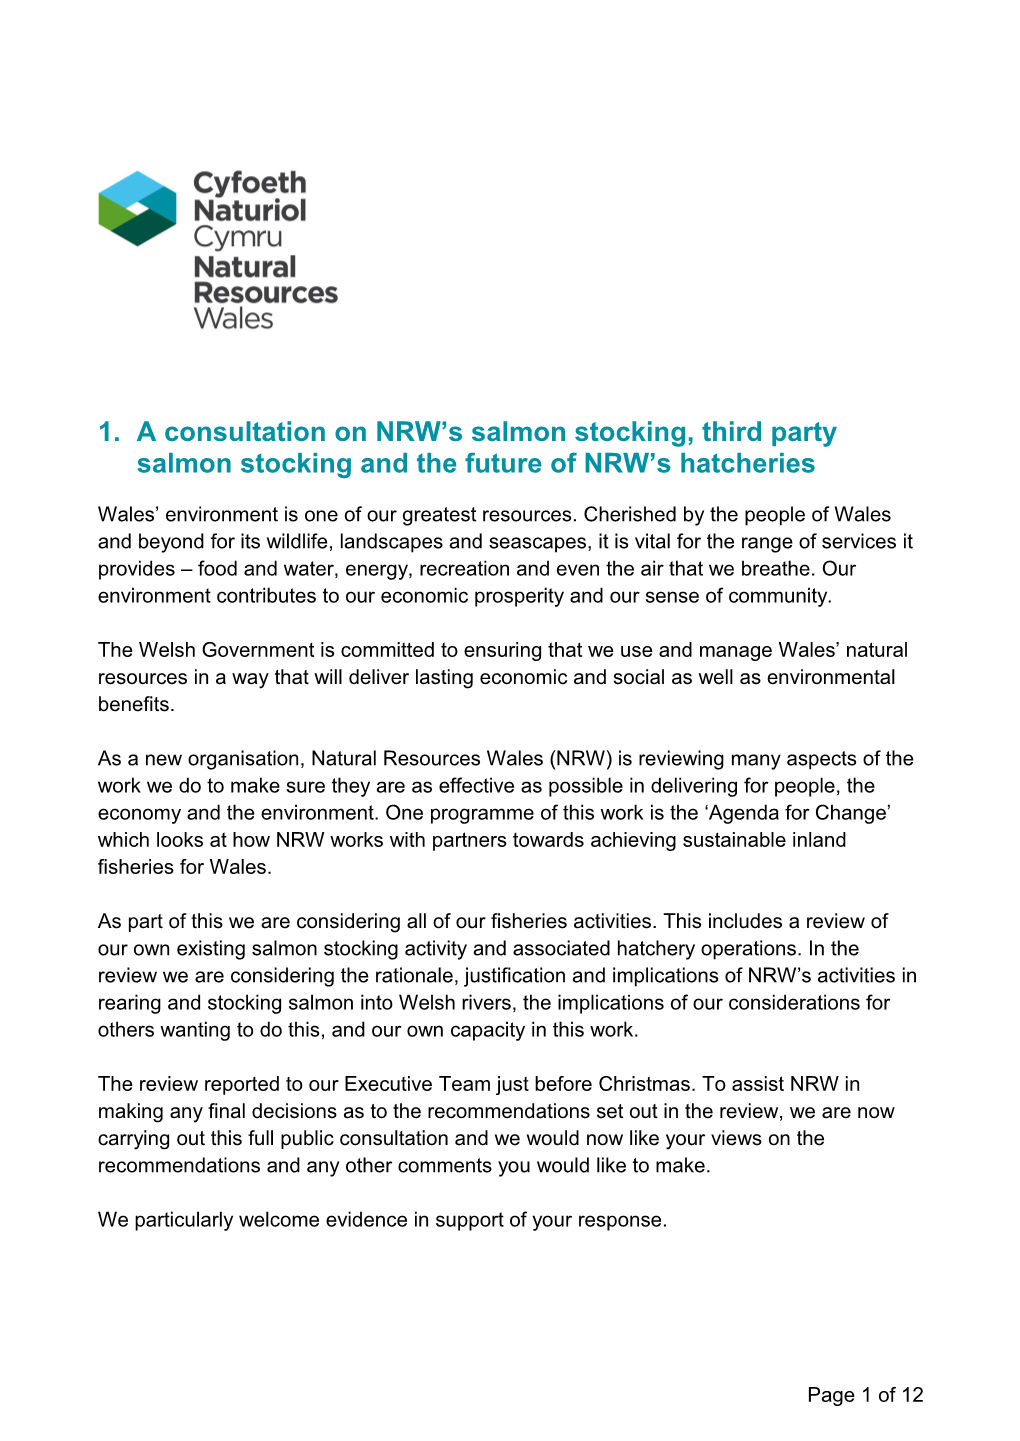 A Consultation on NRW S Salmon Stocking, Third Party Salmon Stocking and the Future Of